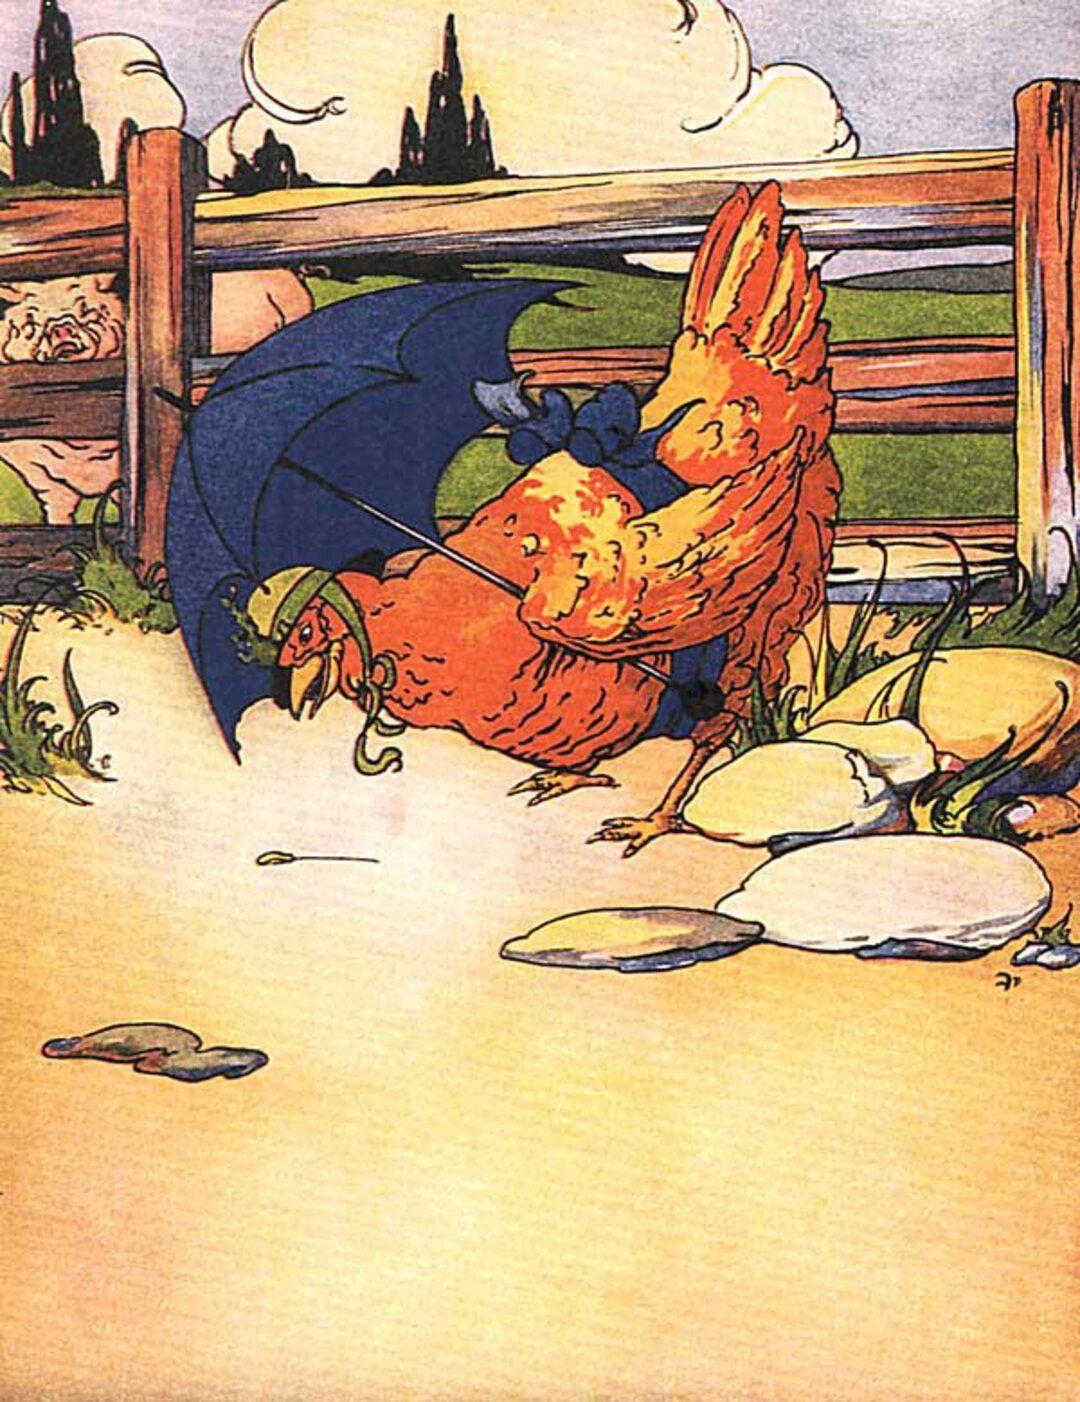 The Little Red Hen #3 image number 2